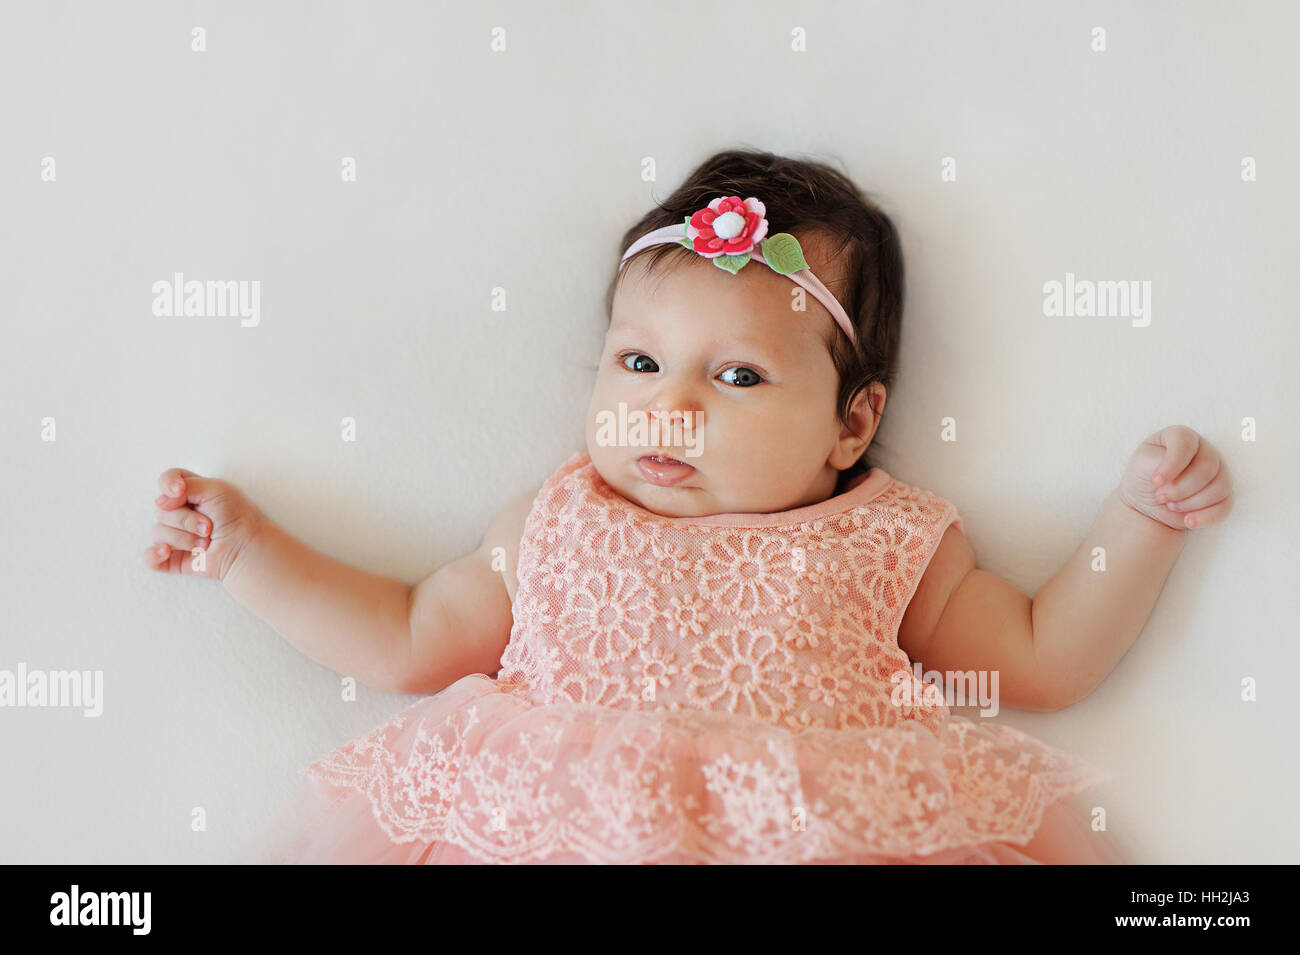 Small very cute wide-eyed smiling baby girl in a pink dress lying ...